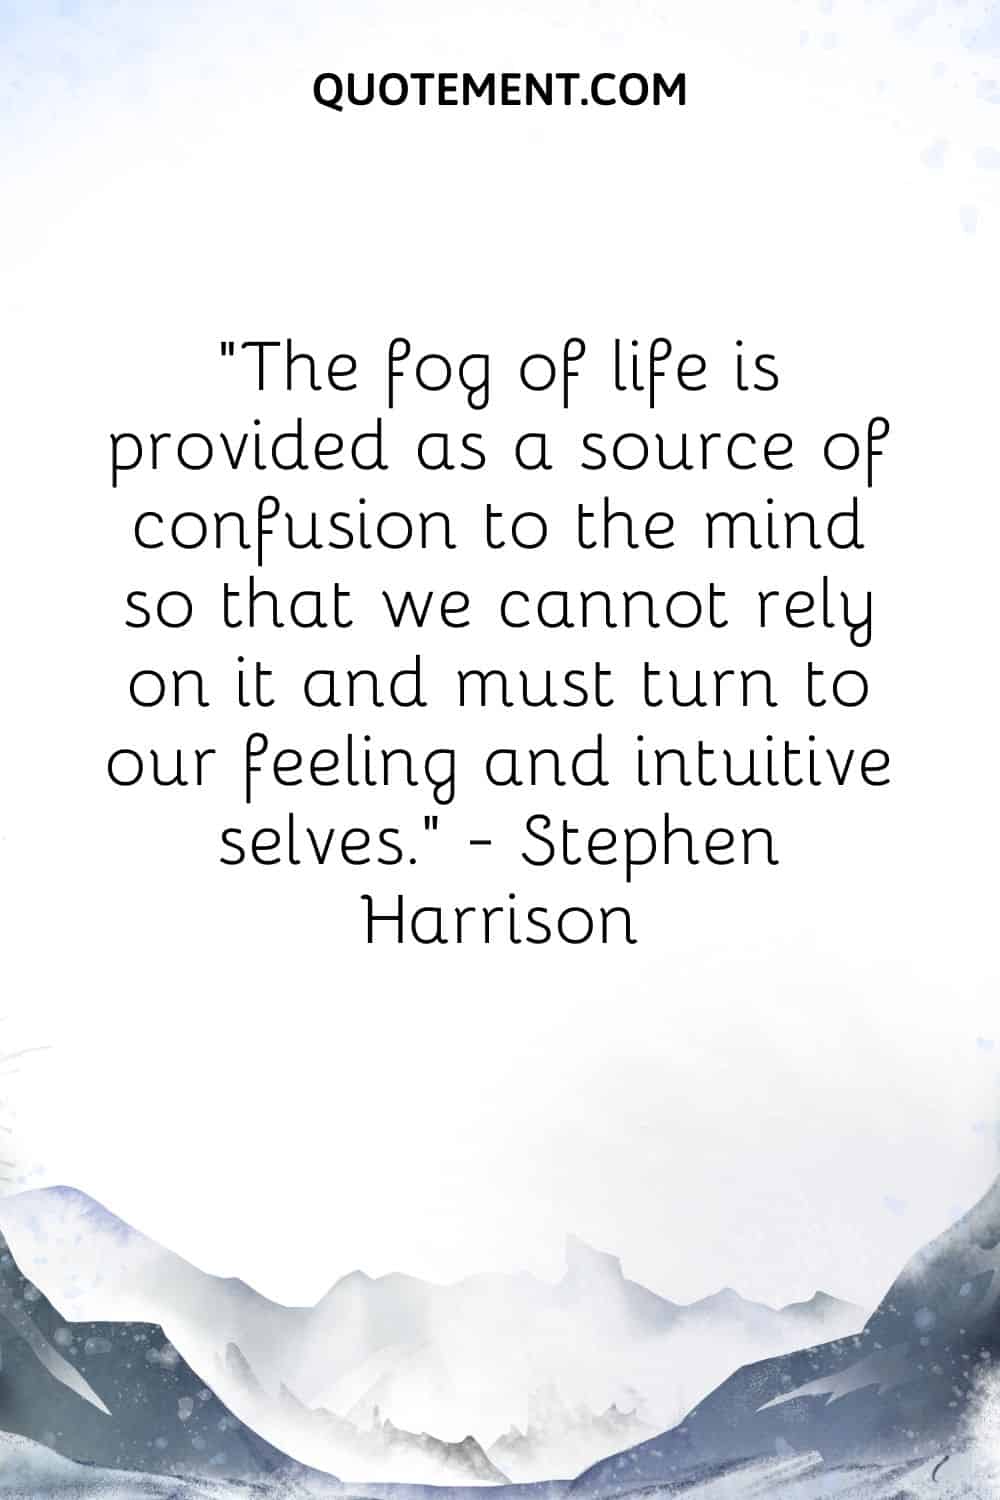 “The fog of life is provided as a source of confusion to the mind so that we cannot rely on it and must turn to our feeling and intuitive selves